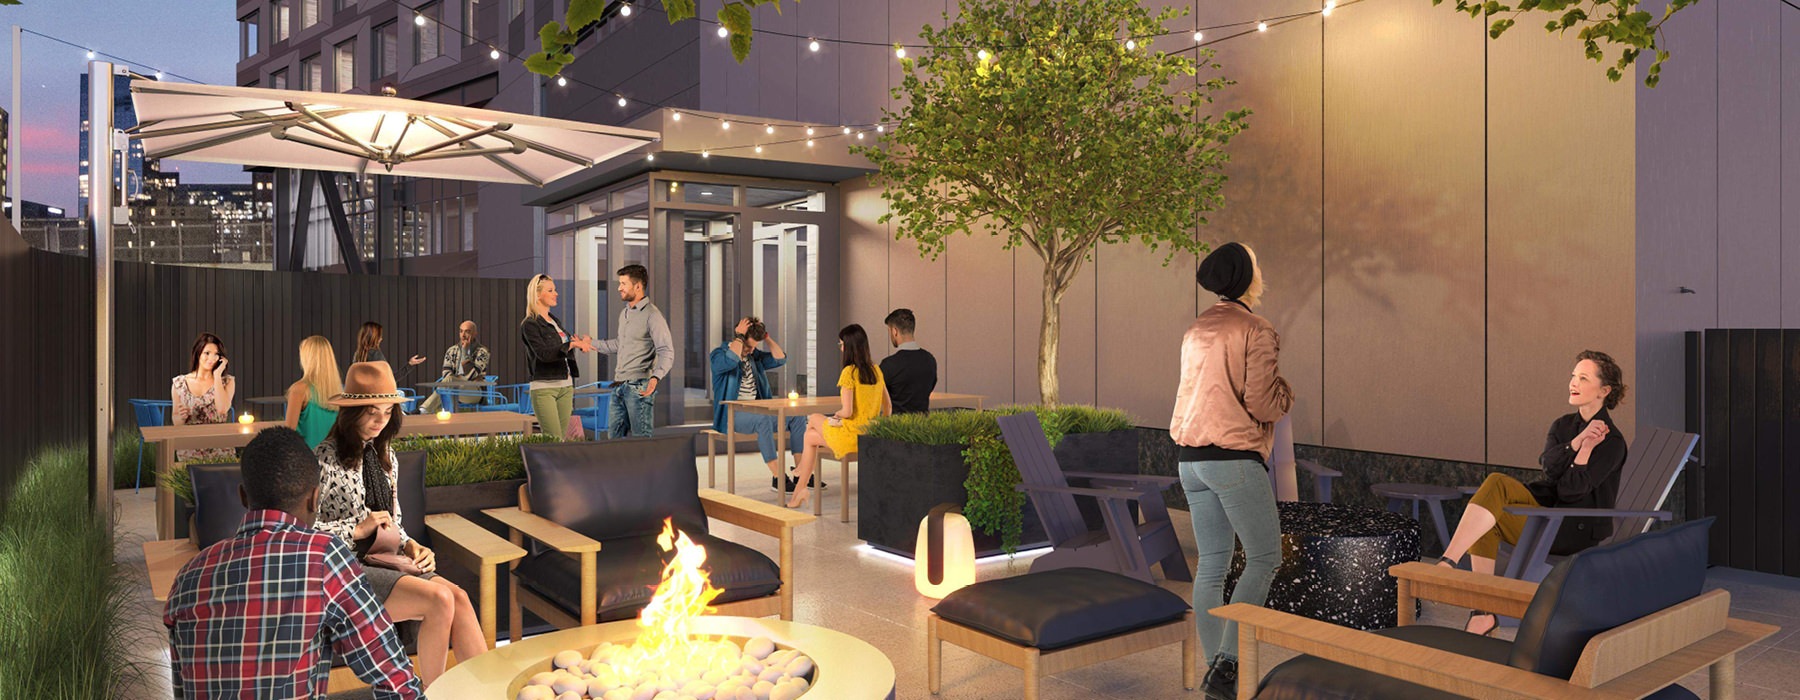 rendering of outdoor space with firepit, hanging lights and chairs 